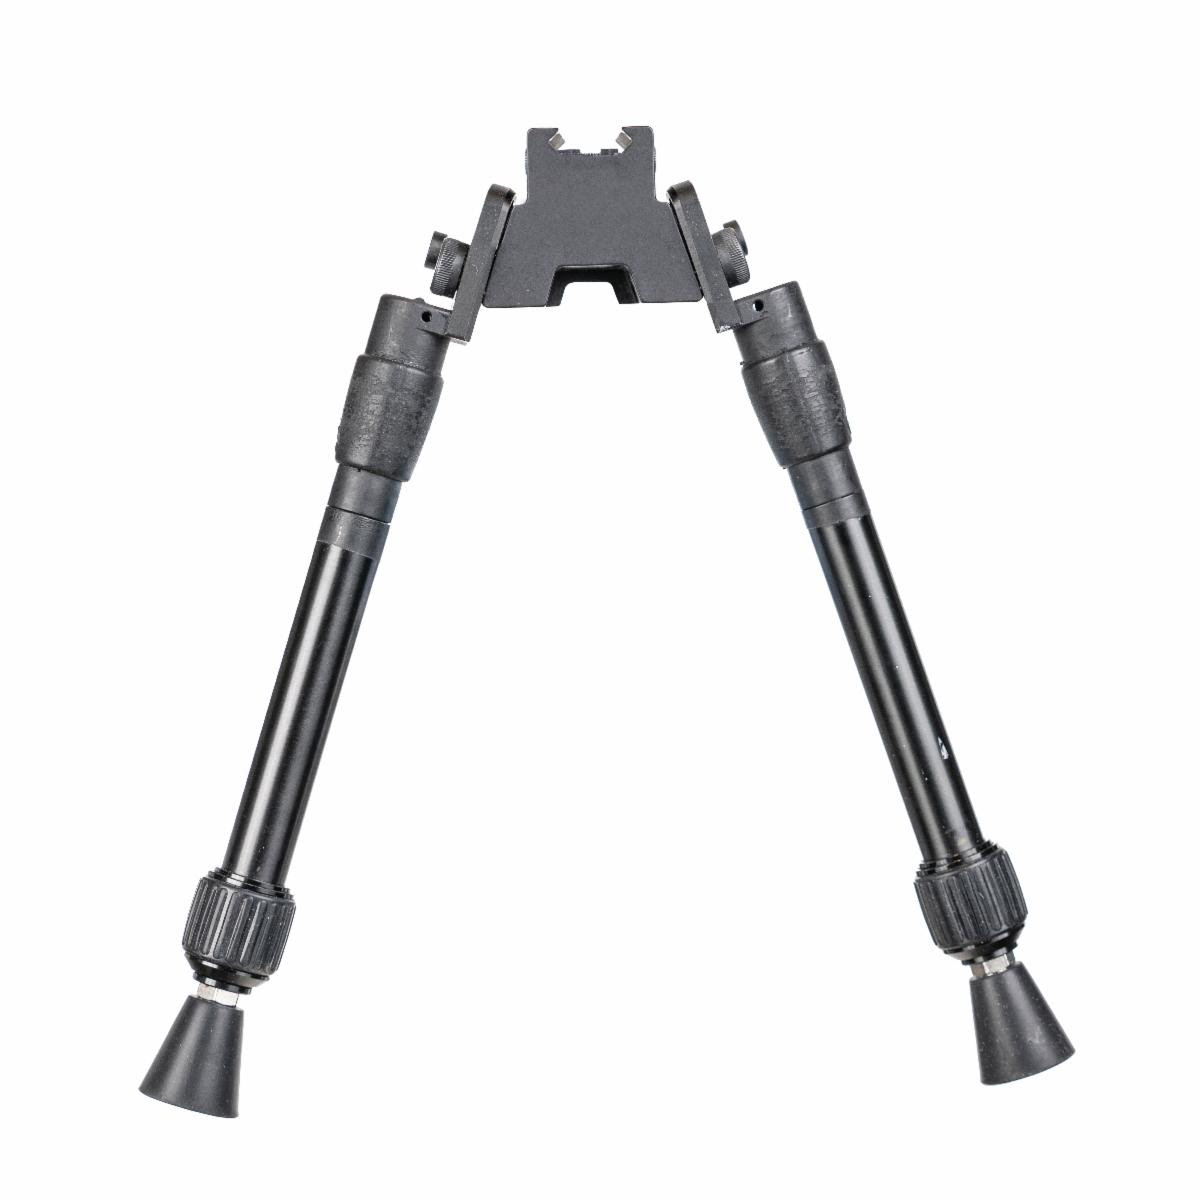 Swagger Bipod's Introduces the SEA-12 and SFR-10 Tactical Bipods